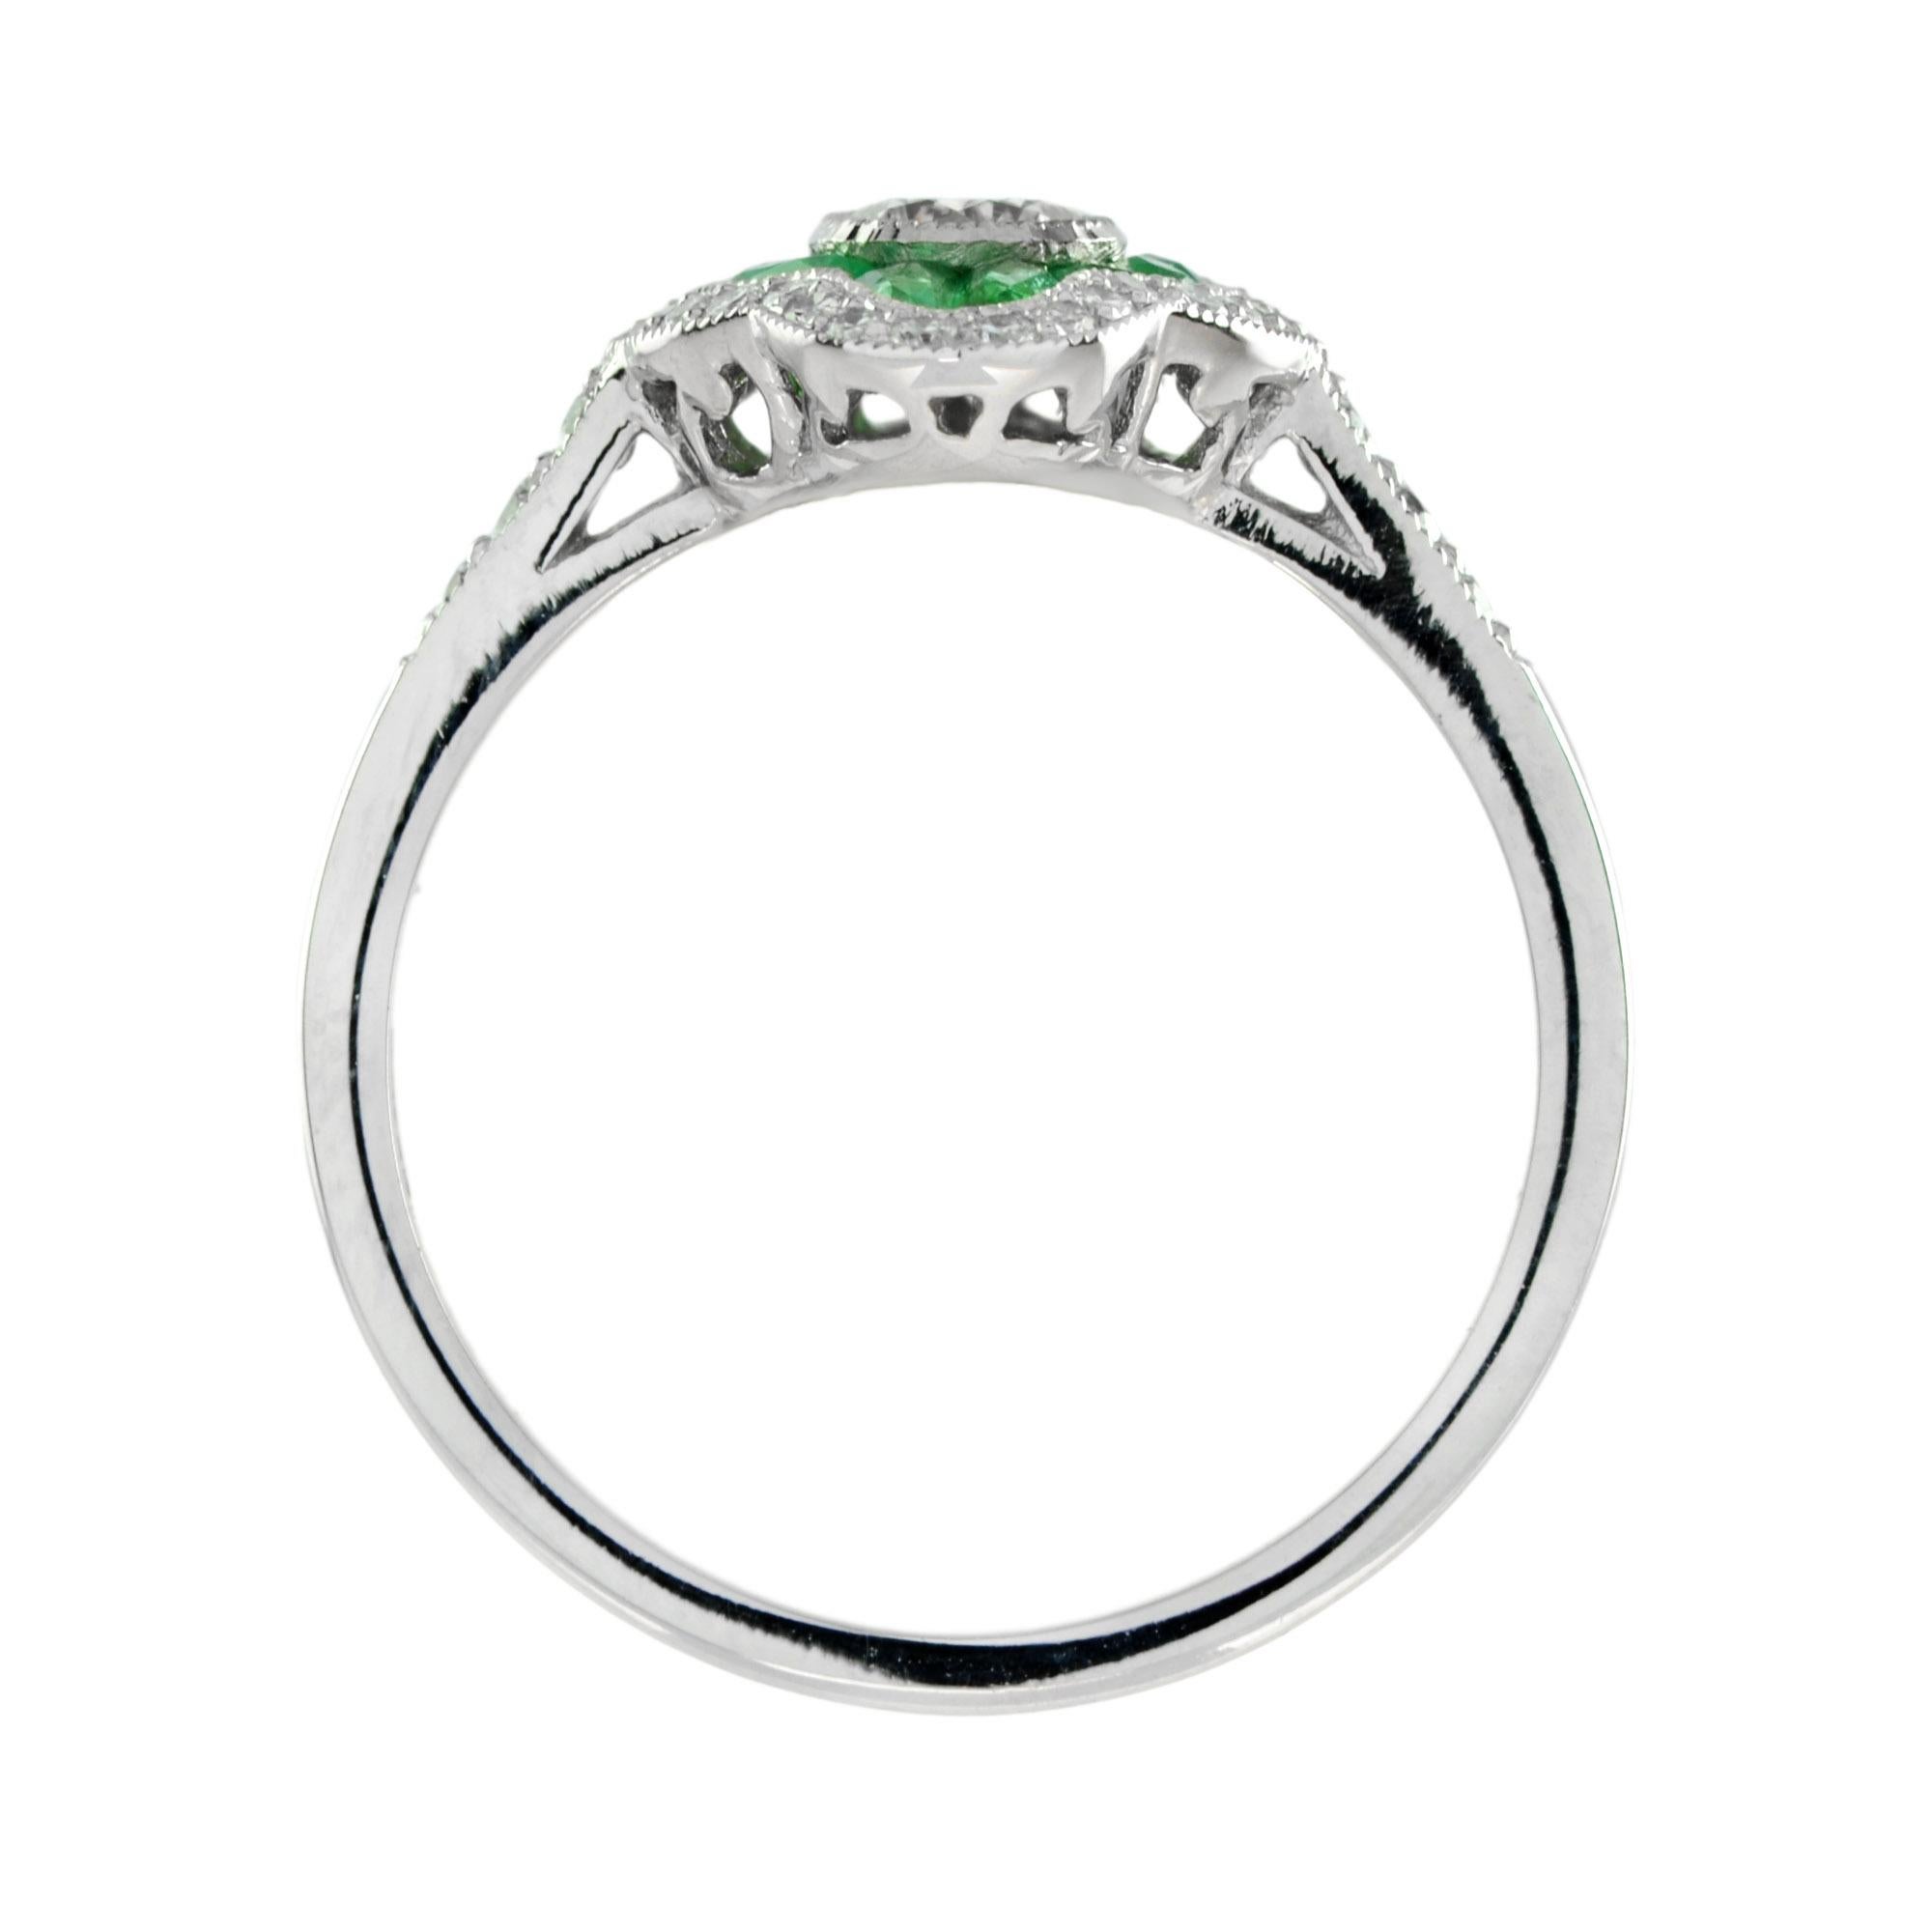 For Sale:  Art Deco Style Diamond and Emerald Engagement Ring in 18K White Gold 5